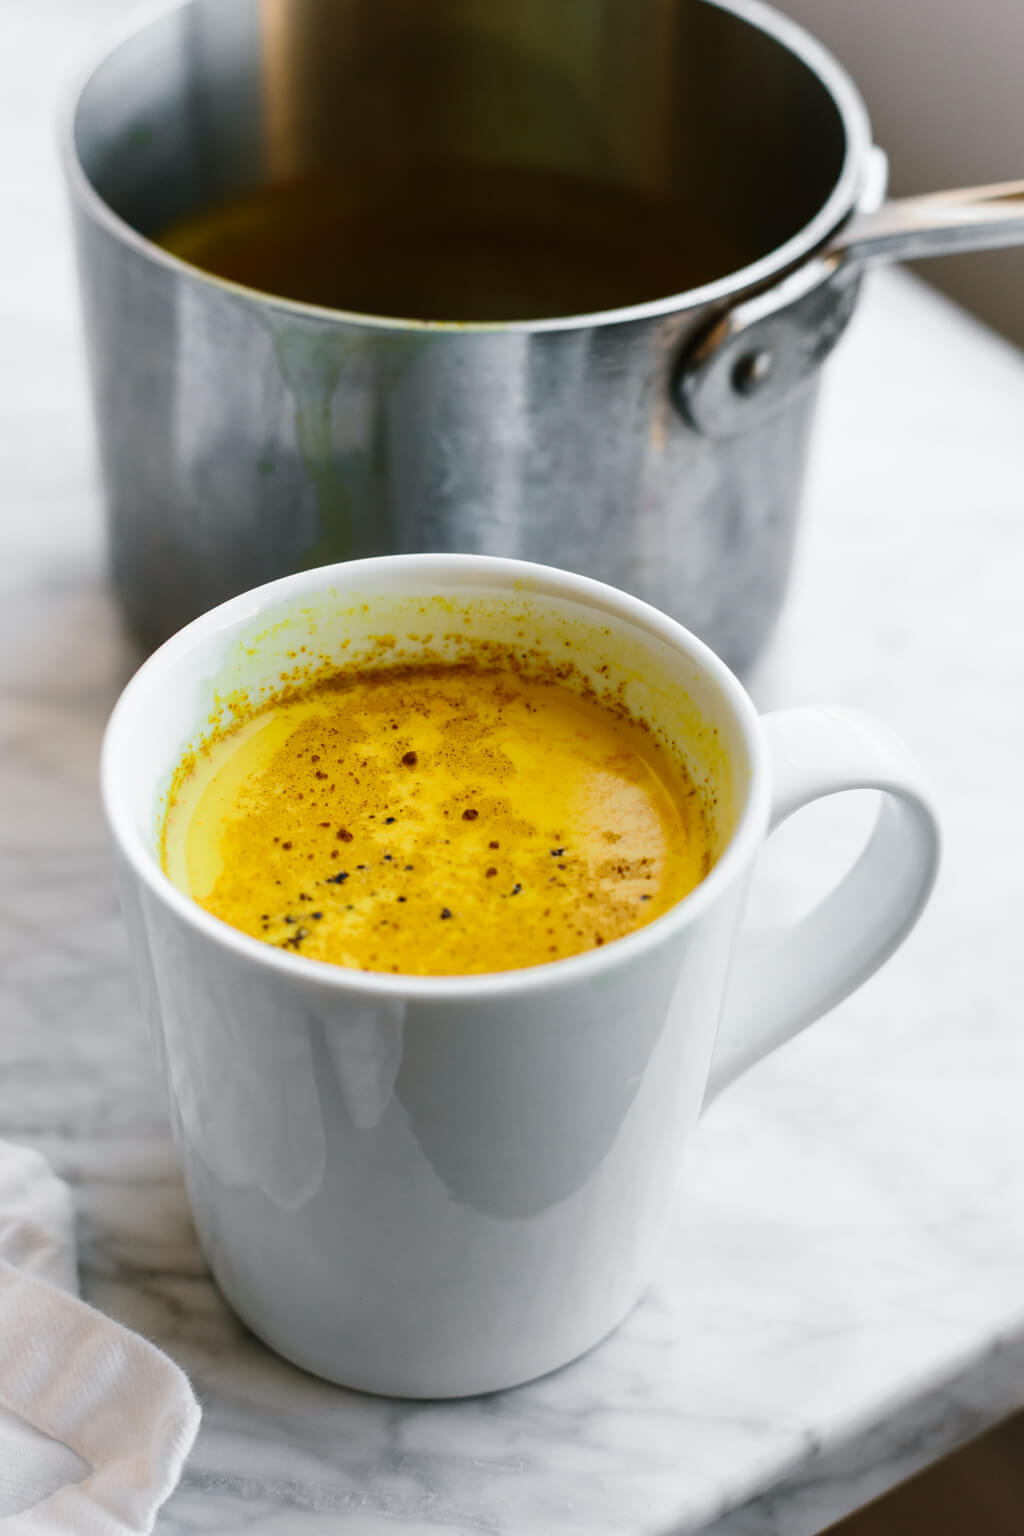 Golden Milk (Turmeric Milk) is tops on the list for a healthy, healing drink. It dairy-free and has potent anti-inflammatory benefits.